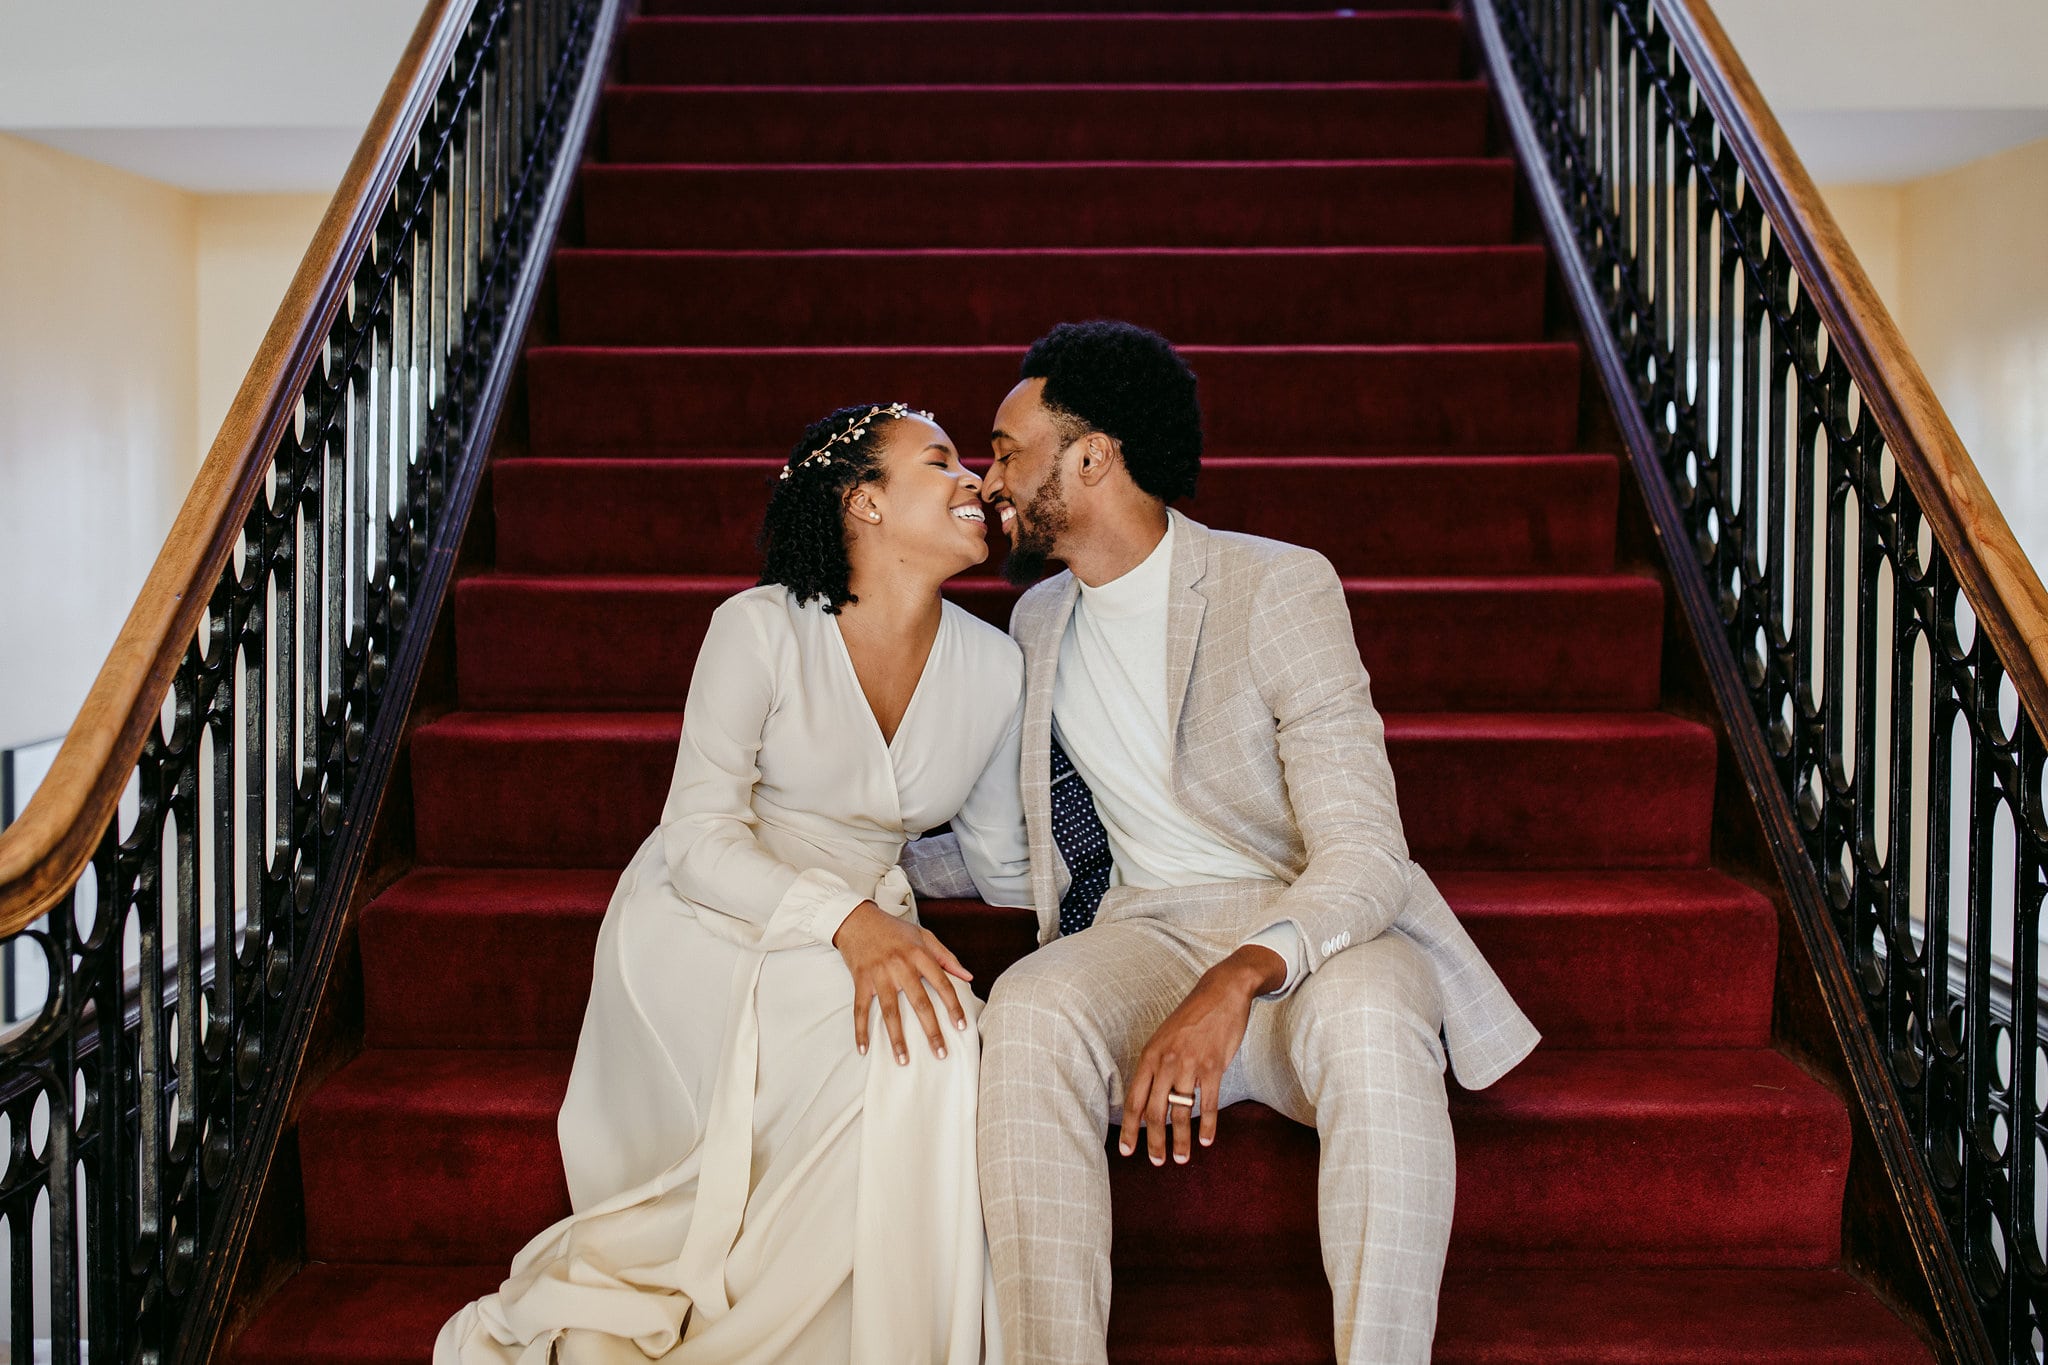 a couple in wedding attire sit on dark red carpeted steps and smile at each other, faces almost touching